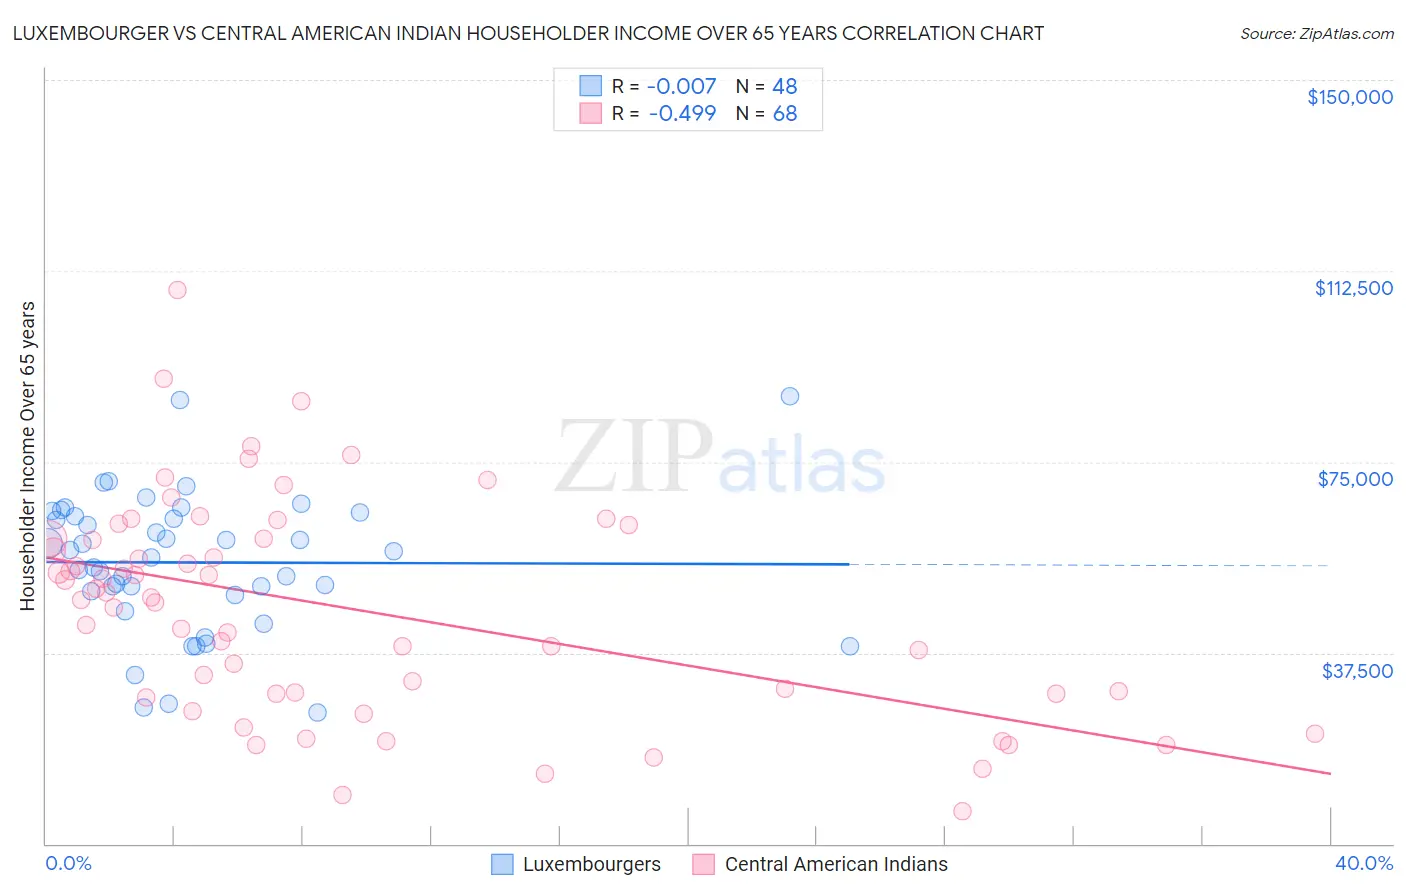 Luxembourger vs Central American Indian Householder Income Over 65 years